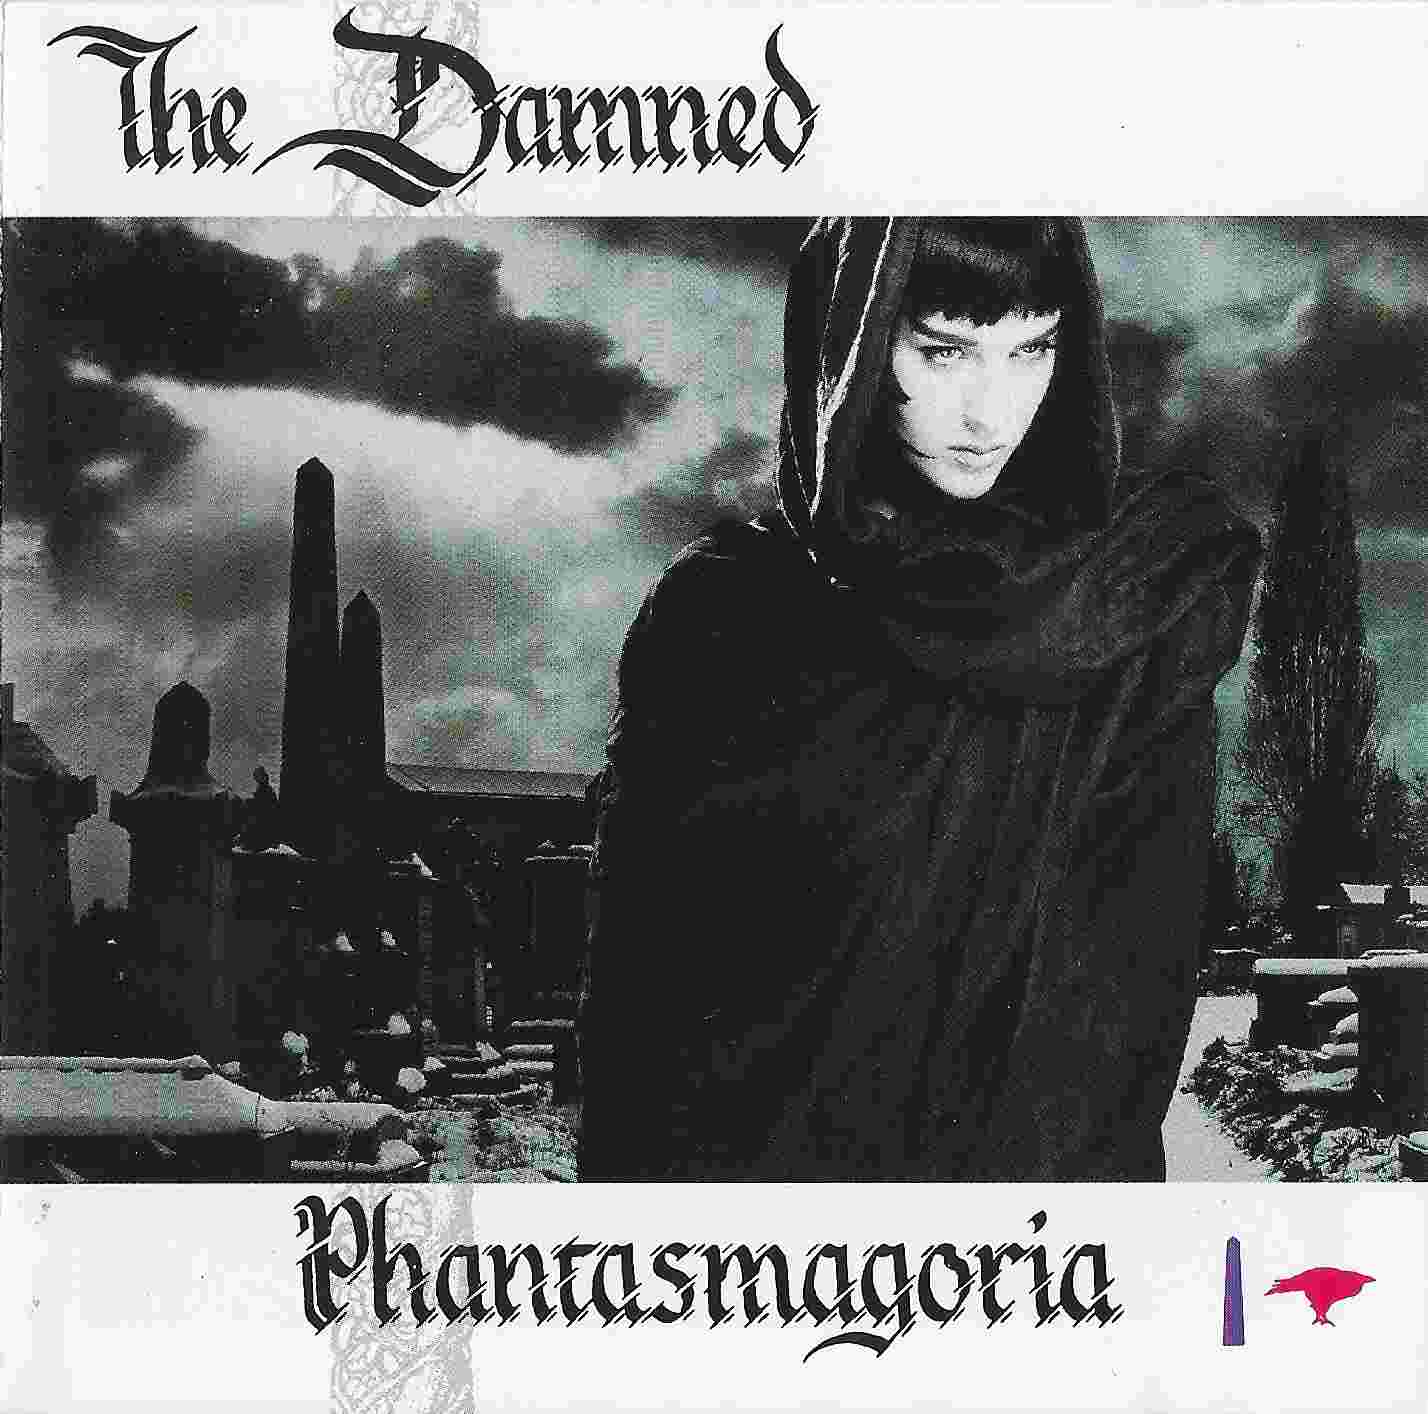 Picture of Phantasmagoria by artist The Damned 